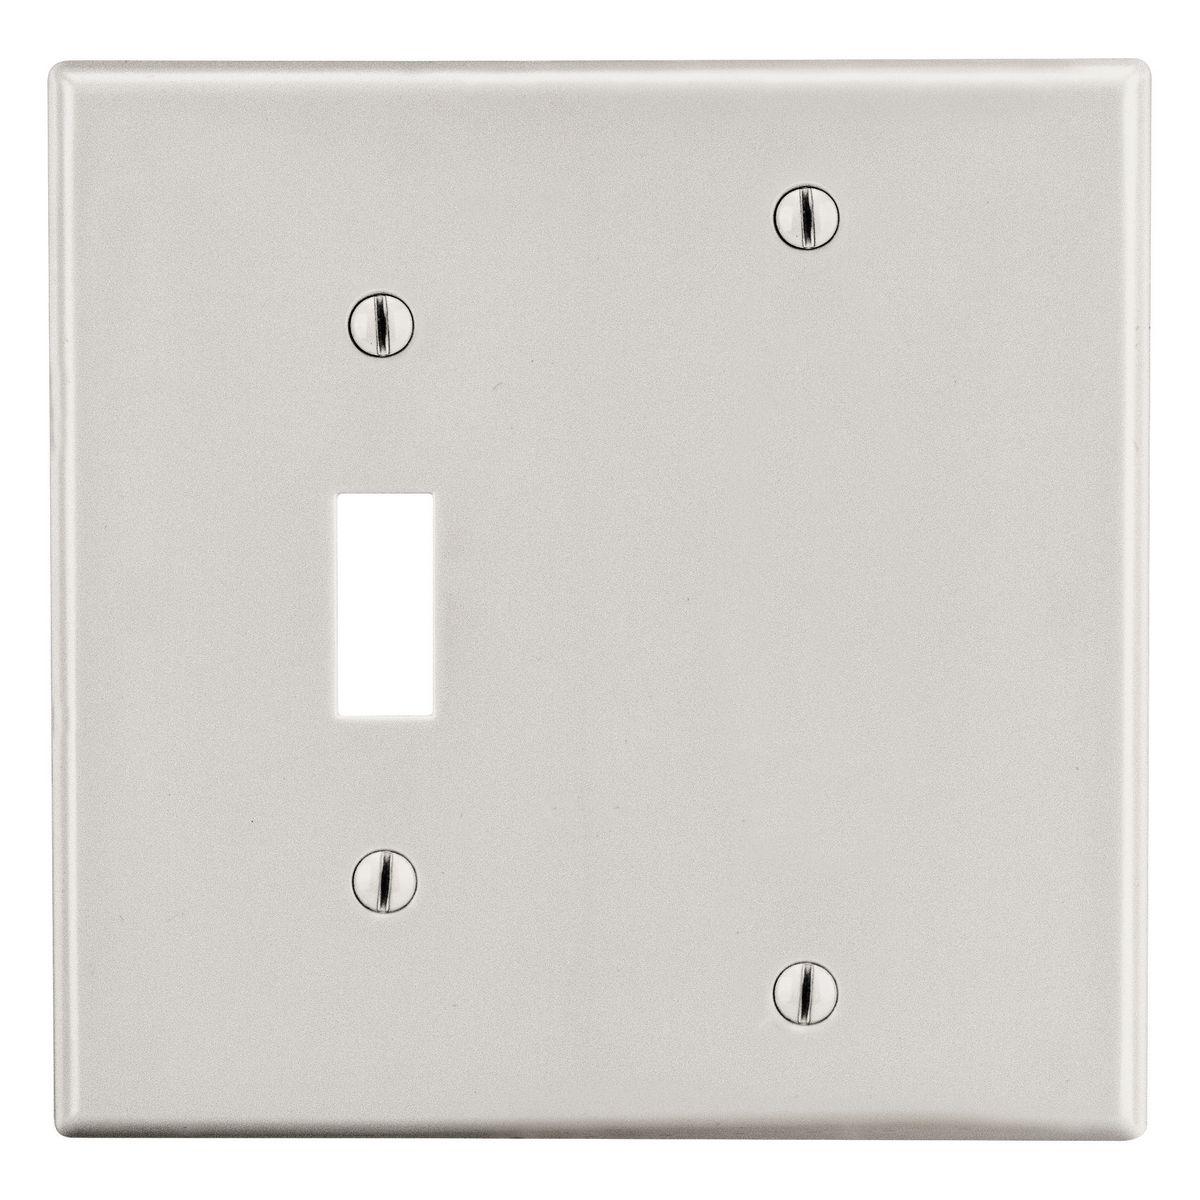 Hubbell PJ113LA Wallplate, Mid-Size 2-Gang, 1) Toggle 1) Box Mount Blank, Light Almond  ; High-impact, self-extinguishing polycarbonate material ; More Rigid ; Sharp lines and less dimpling ; Smooth satin finish ; Blends into wall with an optimum finish ; Smooth Satin Fi